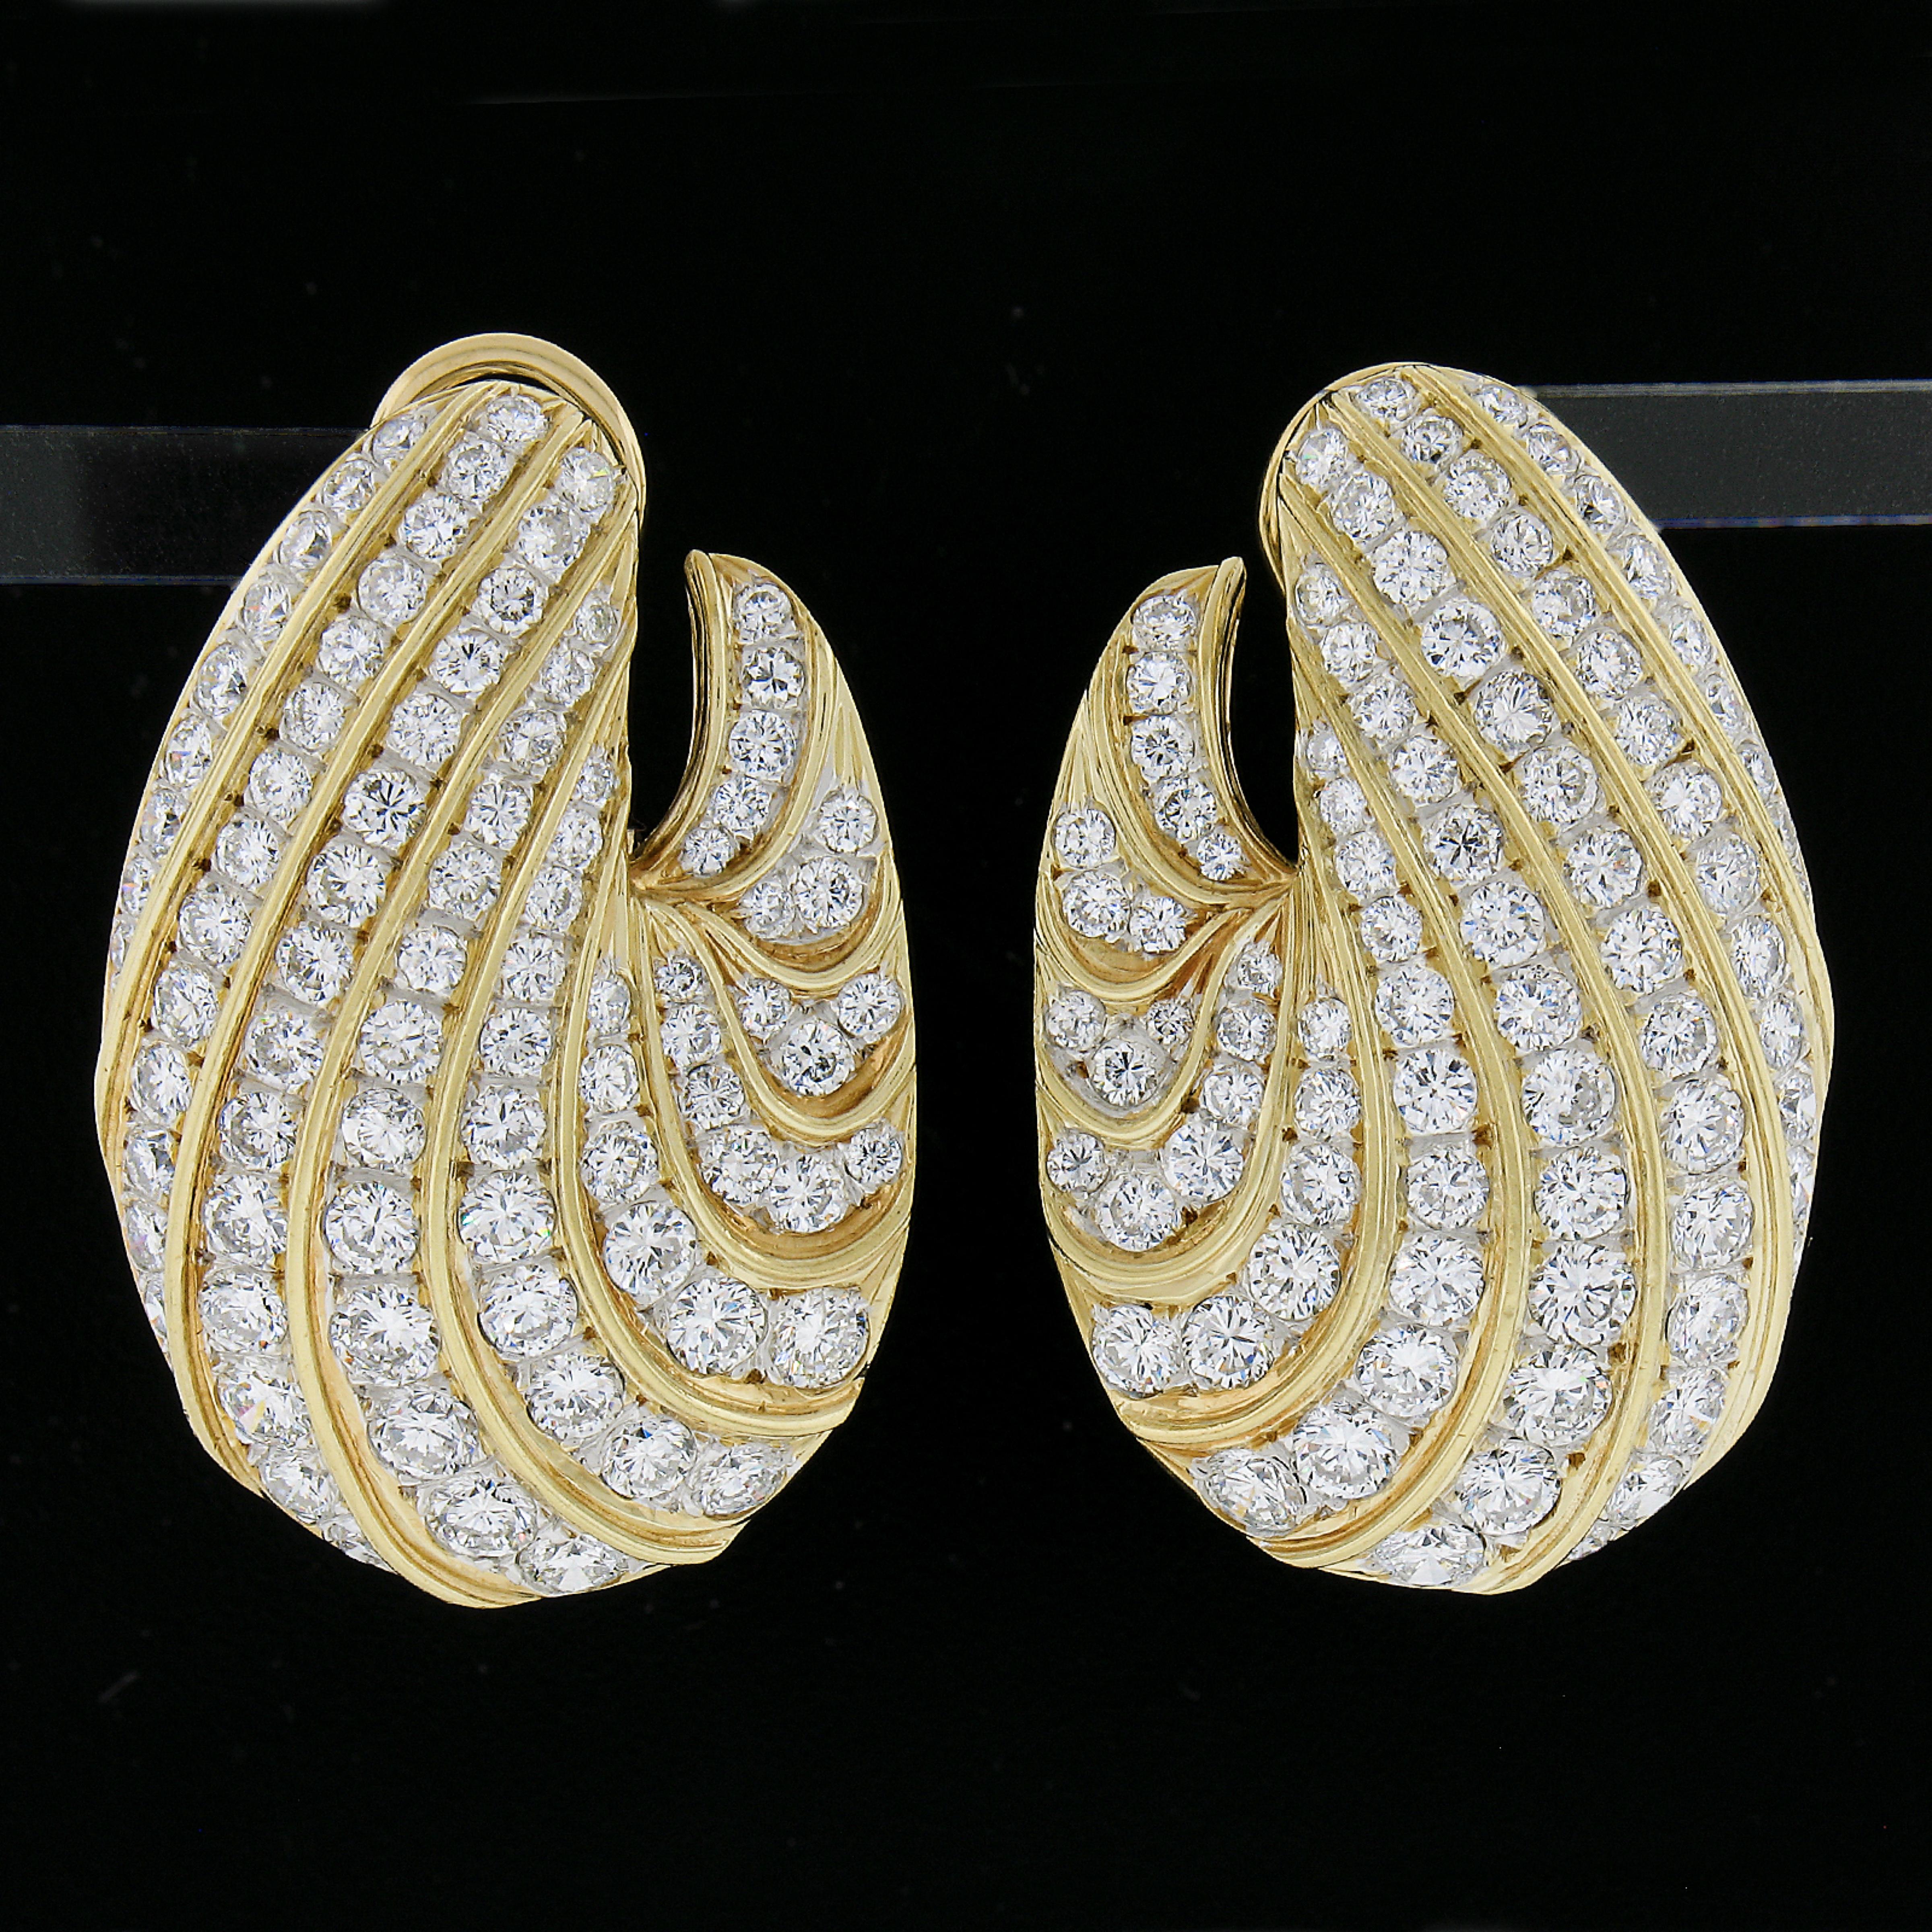 Very wearable and elegant style of earring with a white gold base and yellow polished curved lines outlining the diamonds. The diamonds graduate in size from smaller to larger to flow with the design and shape of the earrings. The diamonds are very